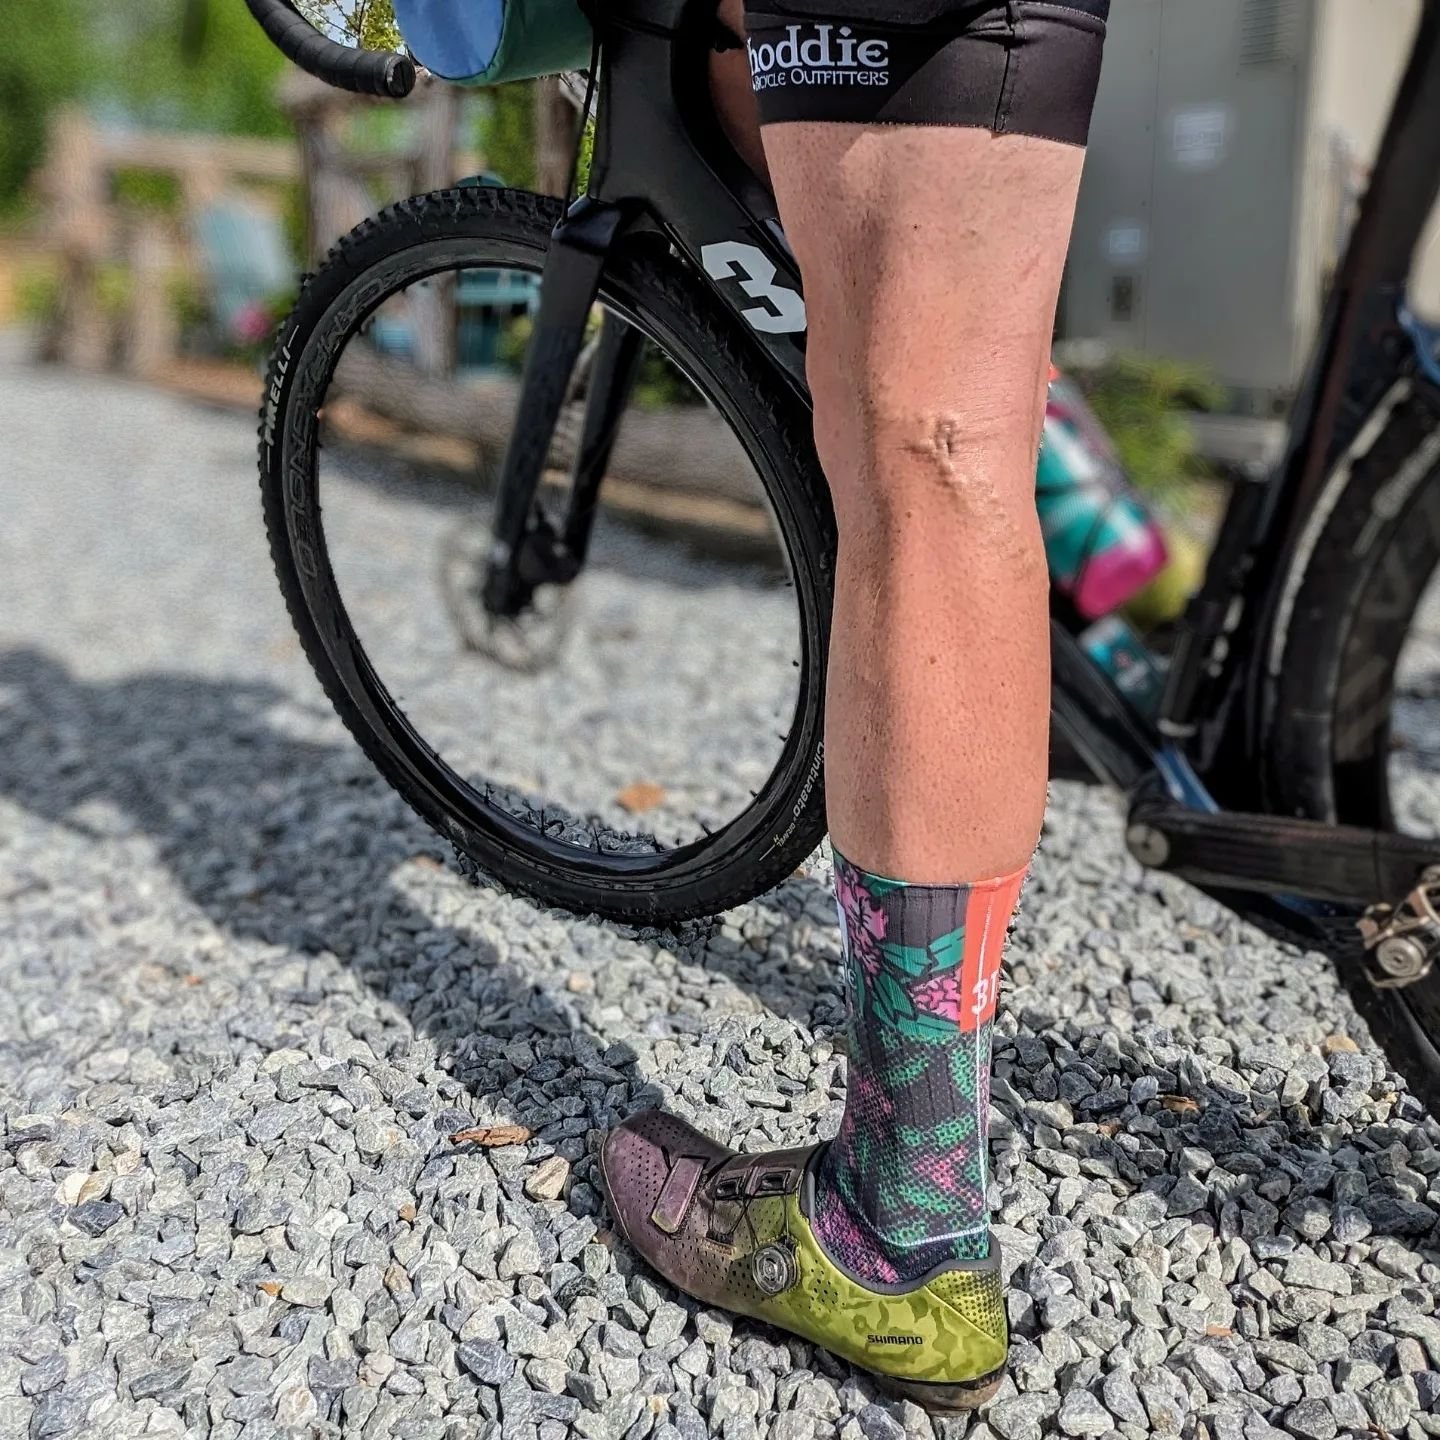 👌Defeet Evo Jet w/ Rhoddie flare👌

We're honored to receive the first pair of Defeet Evo Jet socks. The Evo Jet is an aero crew sock engineered to maximize gains for monumental results. Wind-tunnel tests show a savings of 24+ watts at 38 mph compar